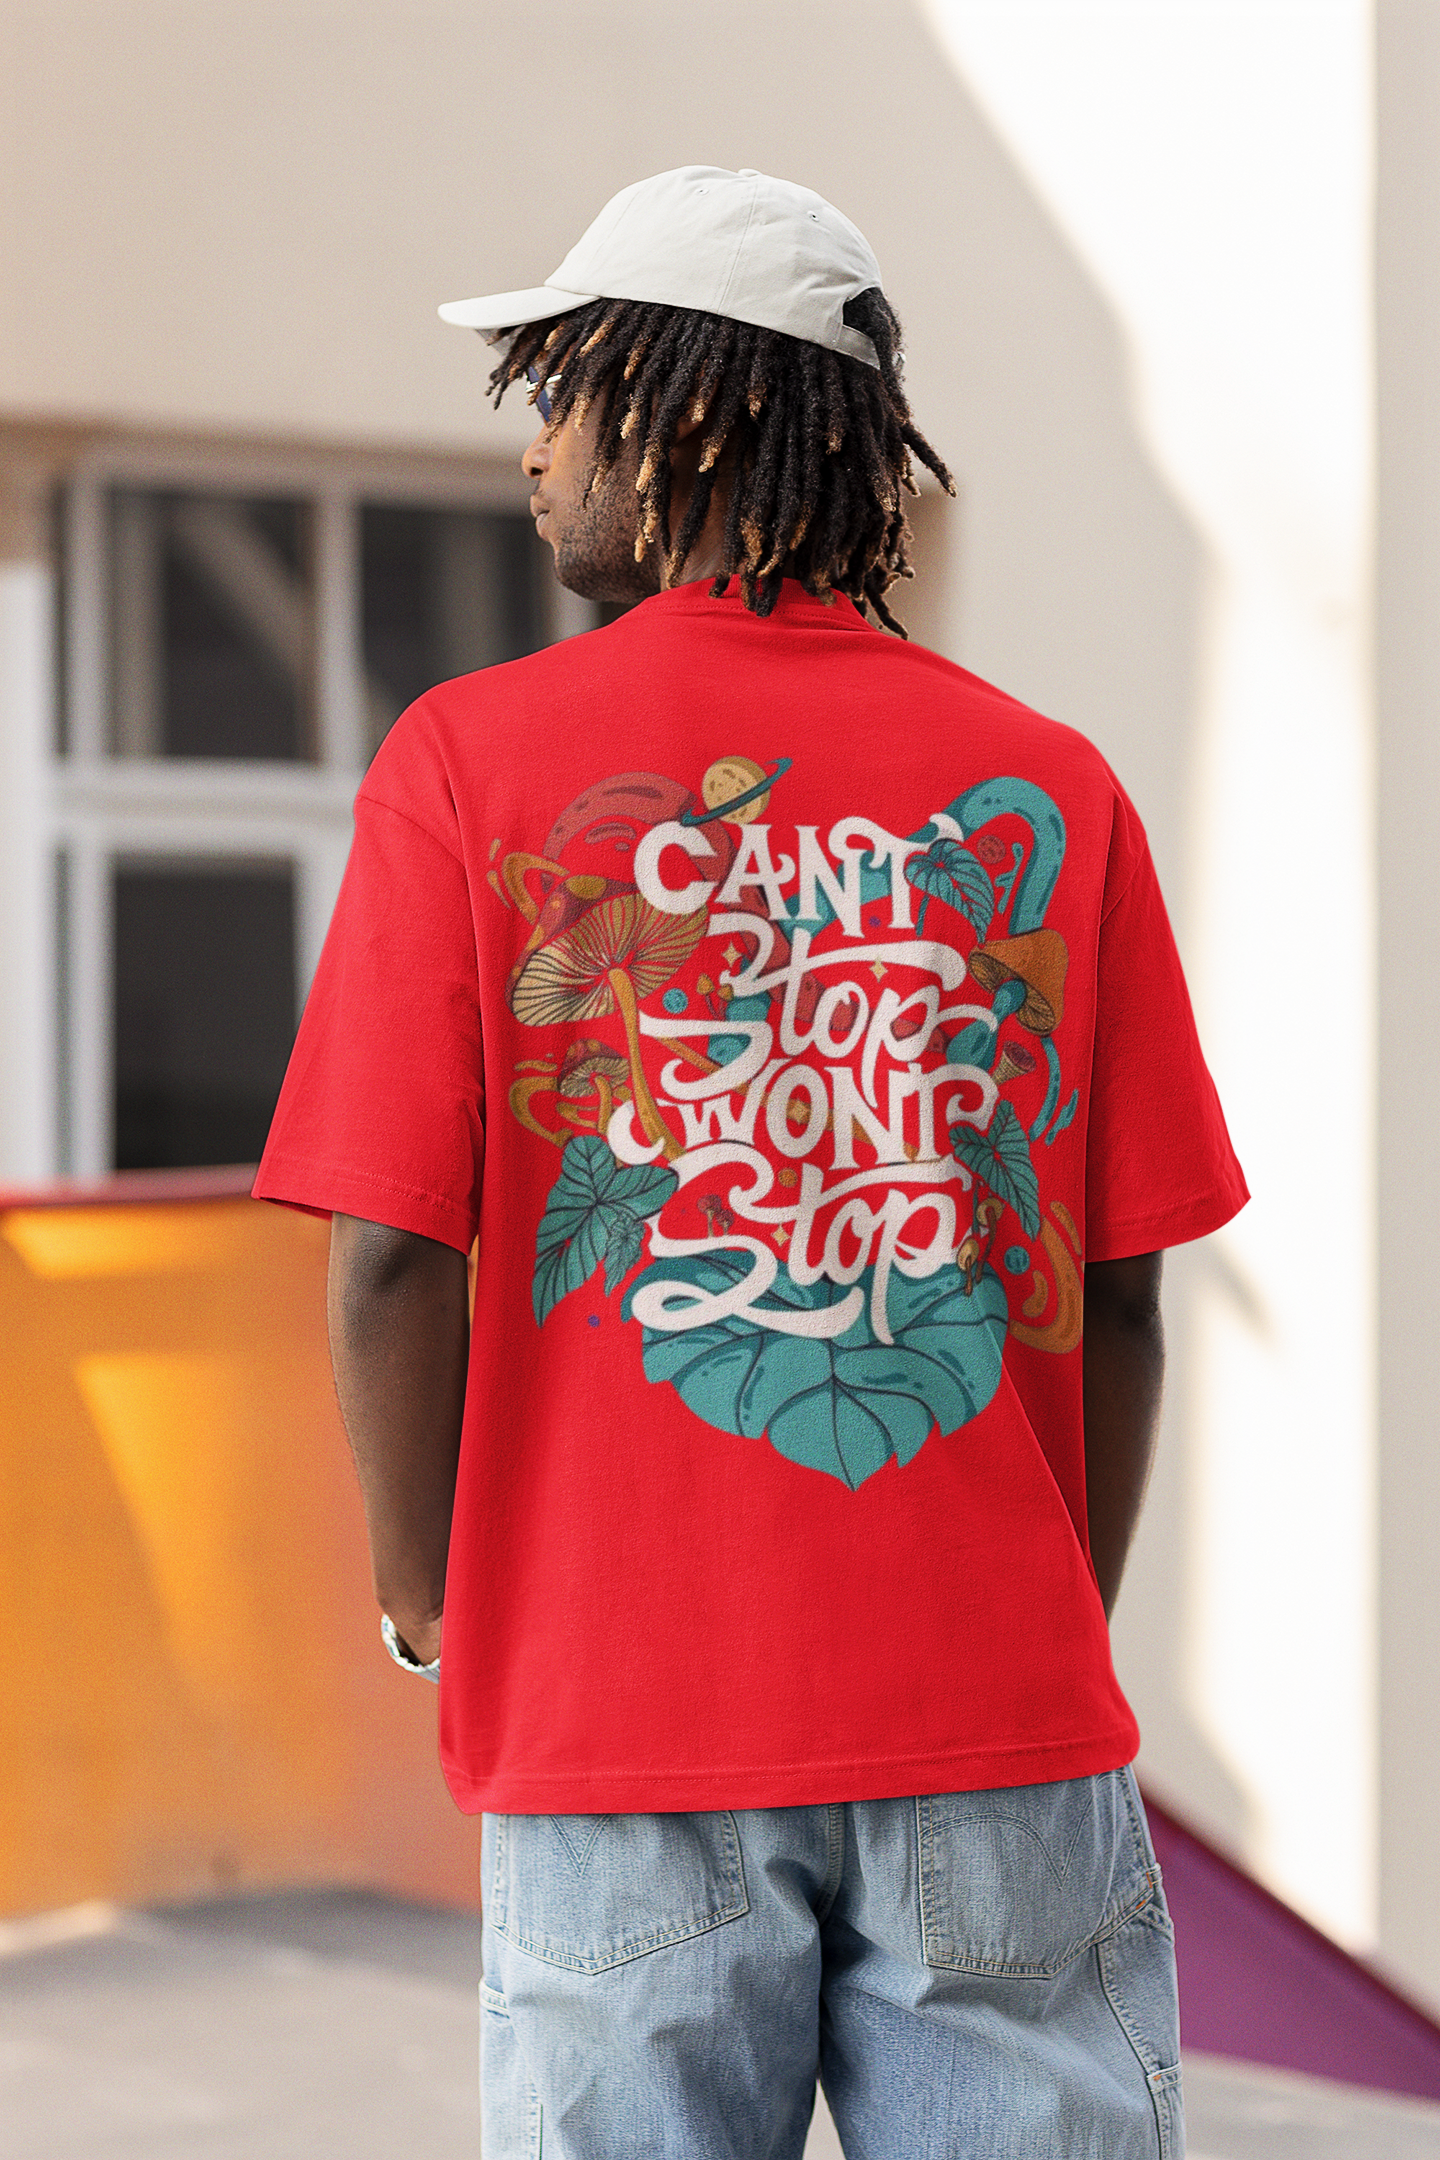 CANT STOP WONT STOP PRINTED OVERSIZED UNISEX T-SHIRT